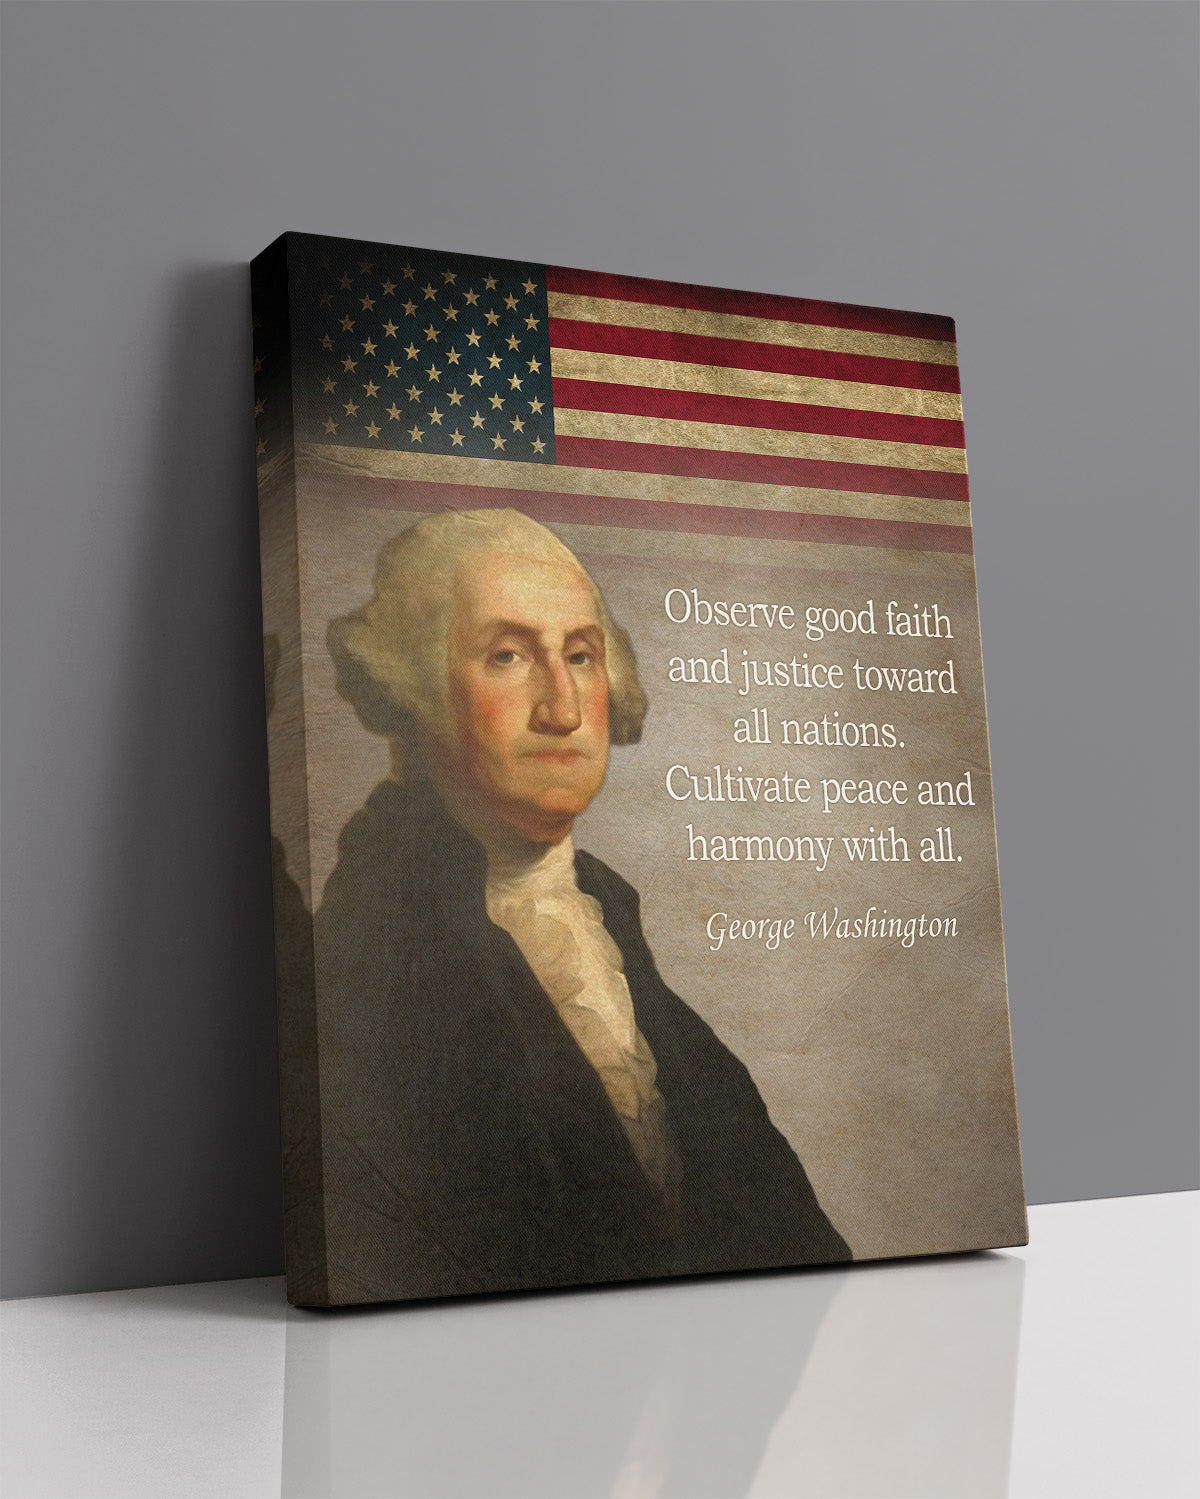 George Washington Historic Quote - Observe good faith - Great Inspirational Gift - Motivational Print - American Patriotic President